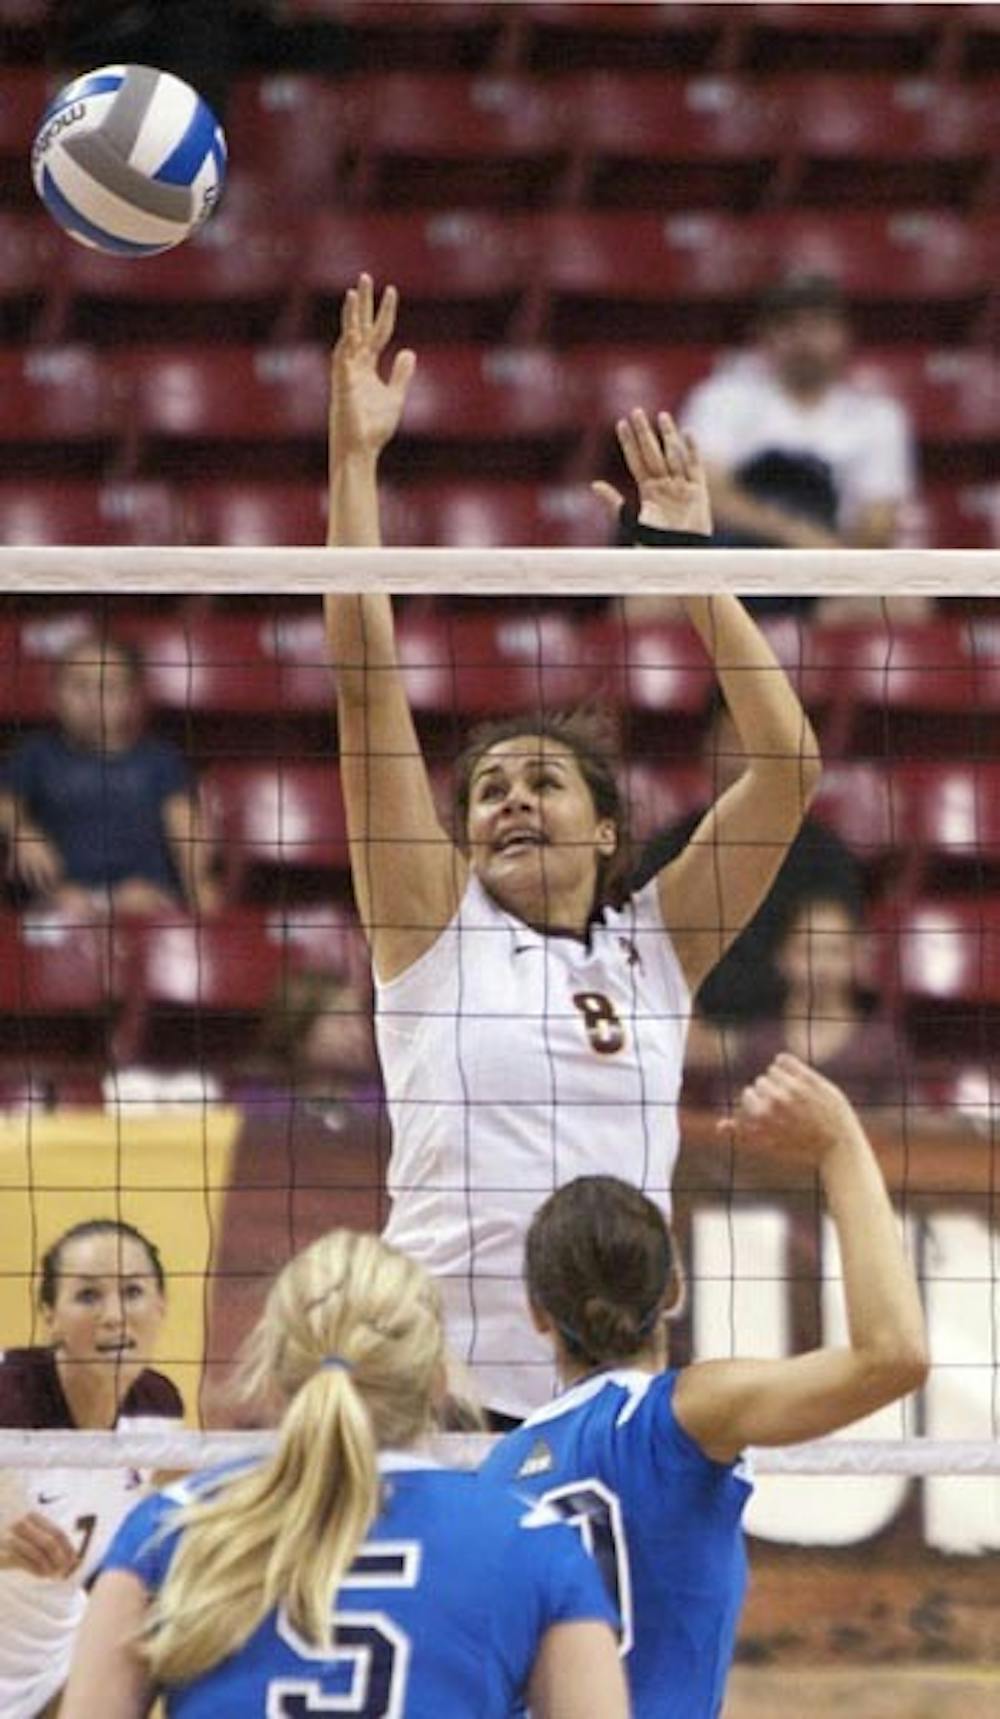 STUNNING SWEEP: Sophomore outside hitter Malia Marquardt attempts to block a return against No. 10 UCLA during ASU's 3-1 win Saturday. The Sun Devils also beat No. 5 USC on Friday, giving them their first sweep of the two schools in 15 years. (Photo by Scott Stuk)